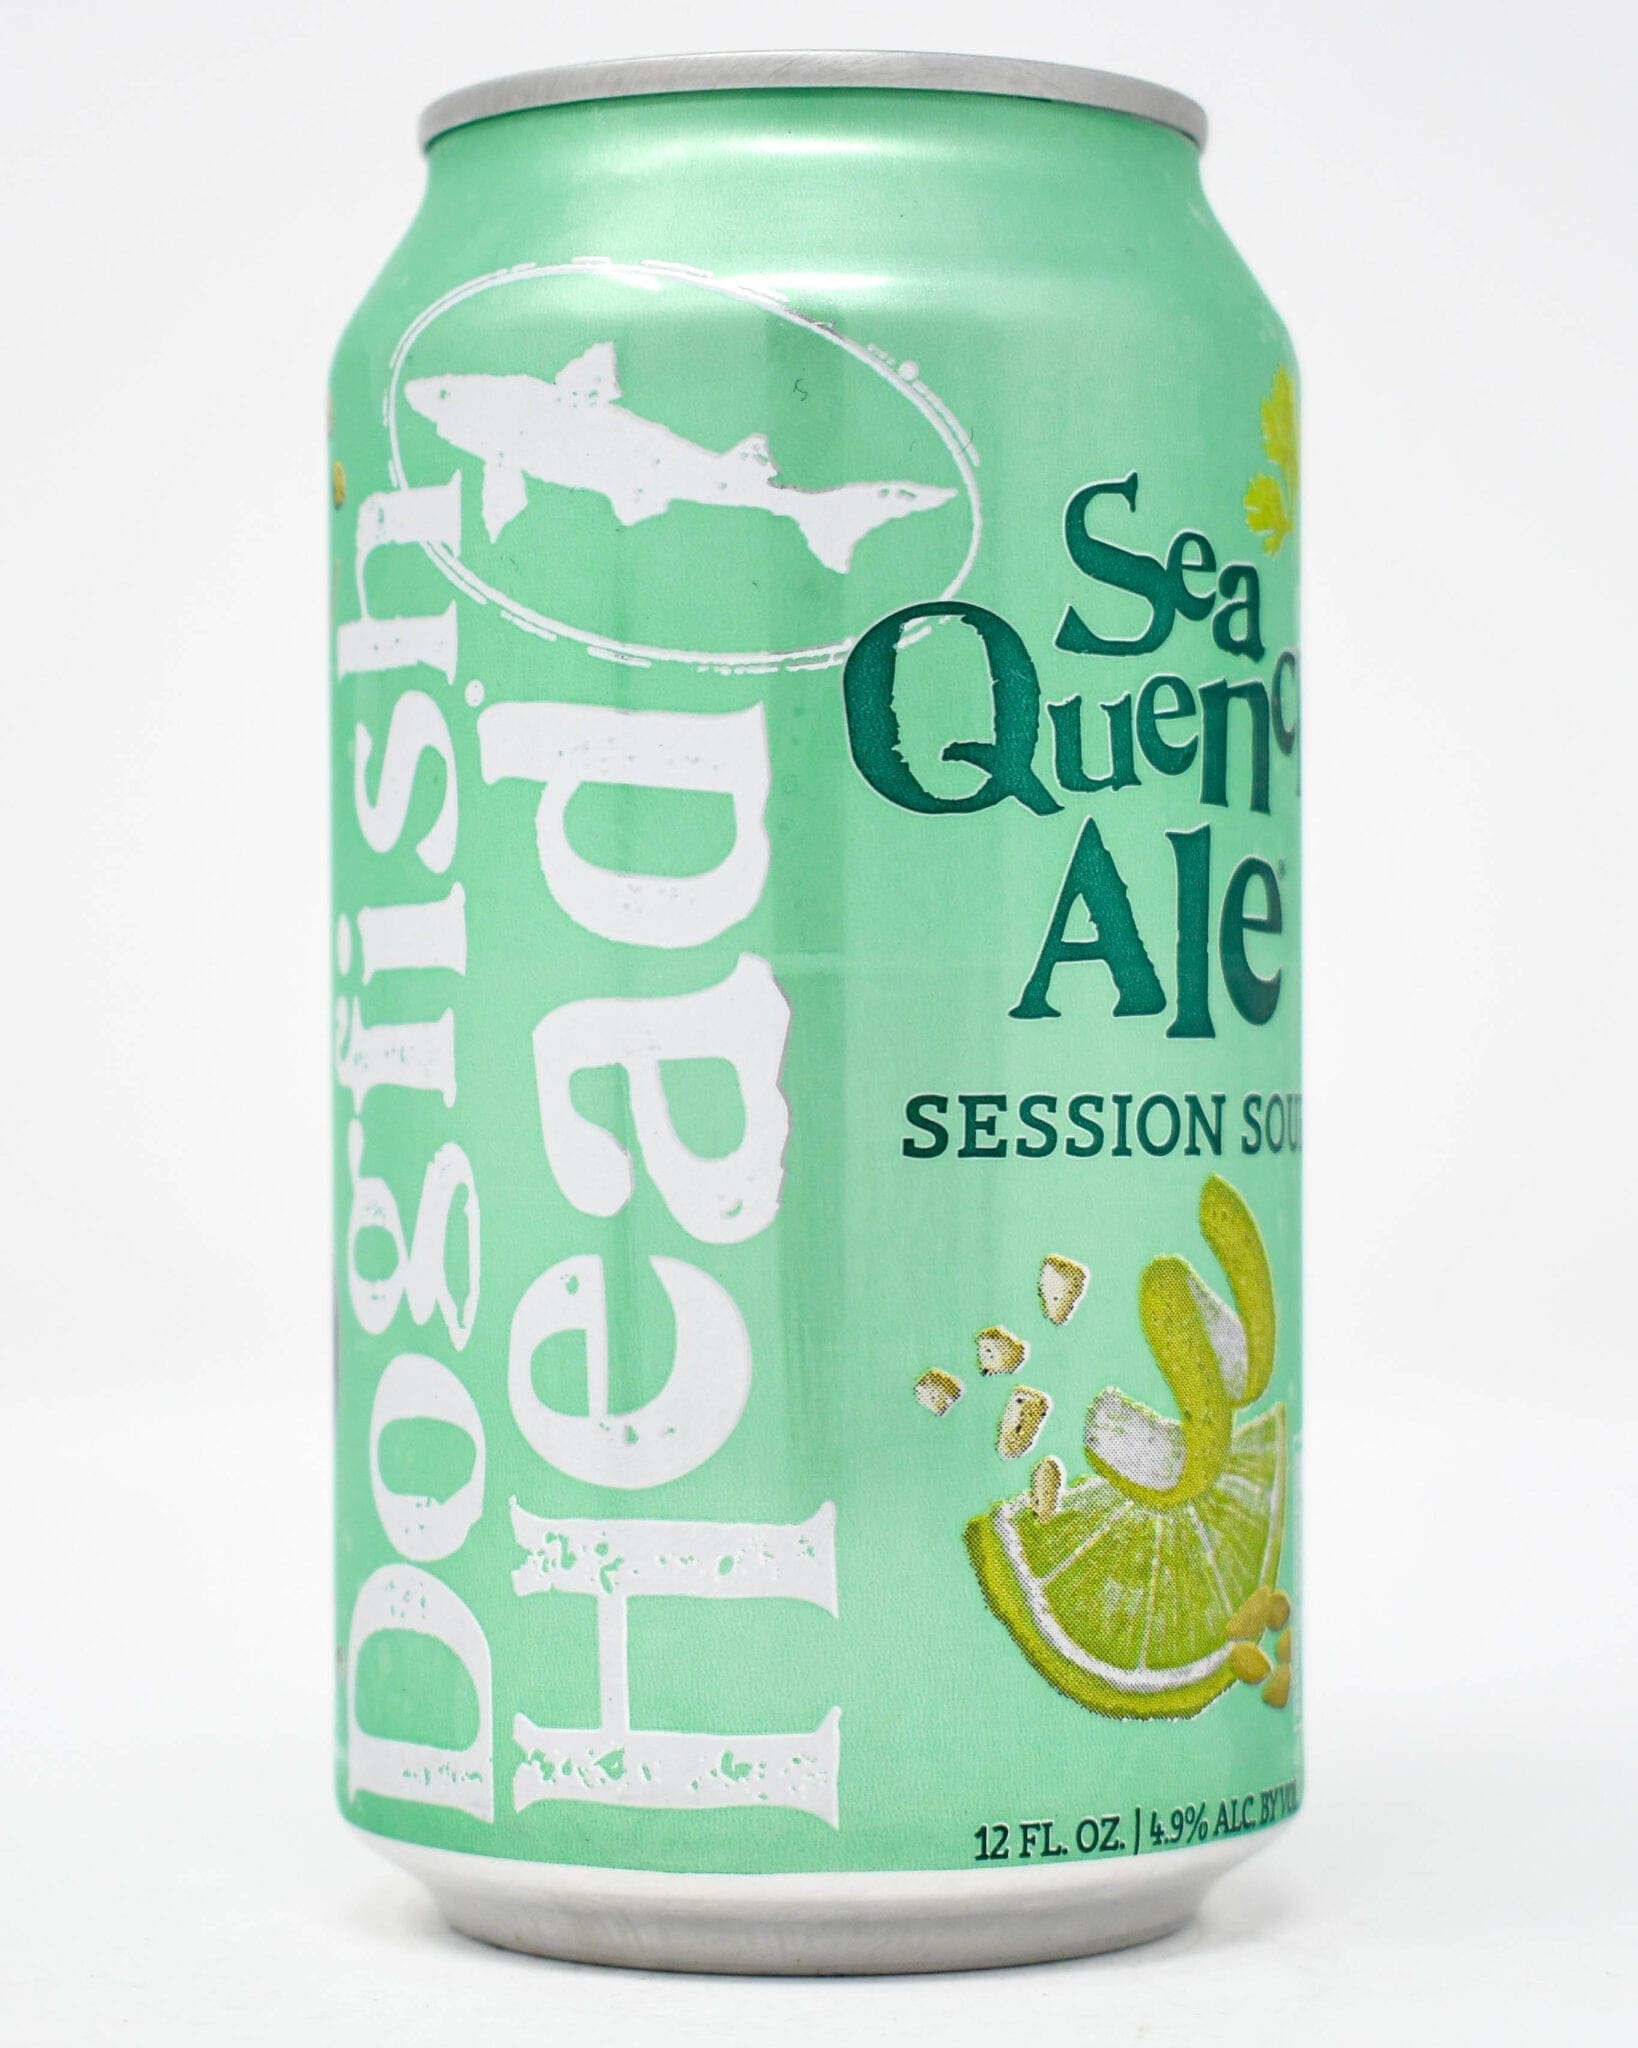 Dogfish Head, SeaQuench Ale, Session Sour, 12oz Can - Princeville Wine ...